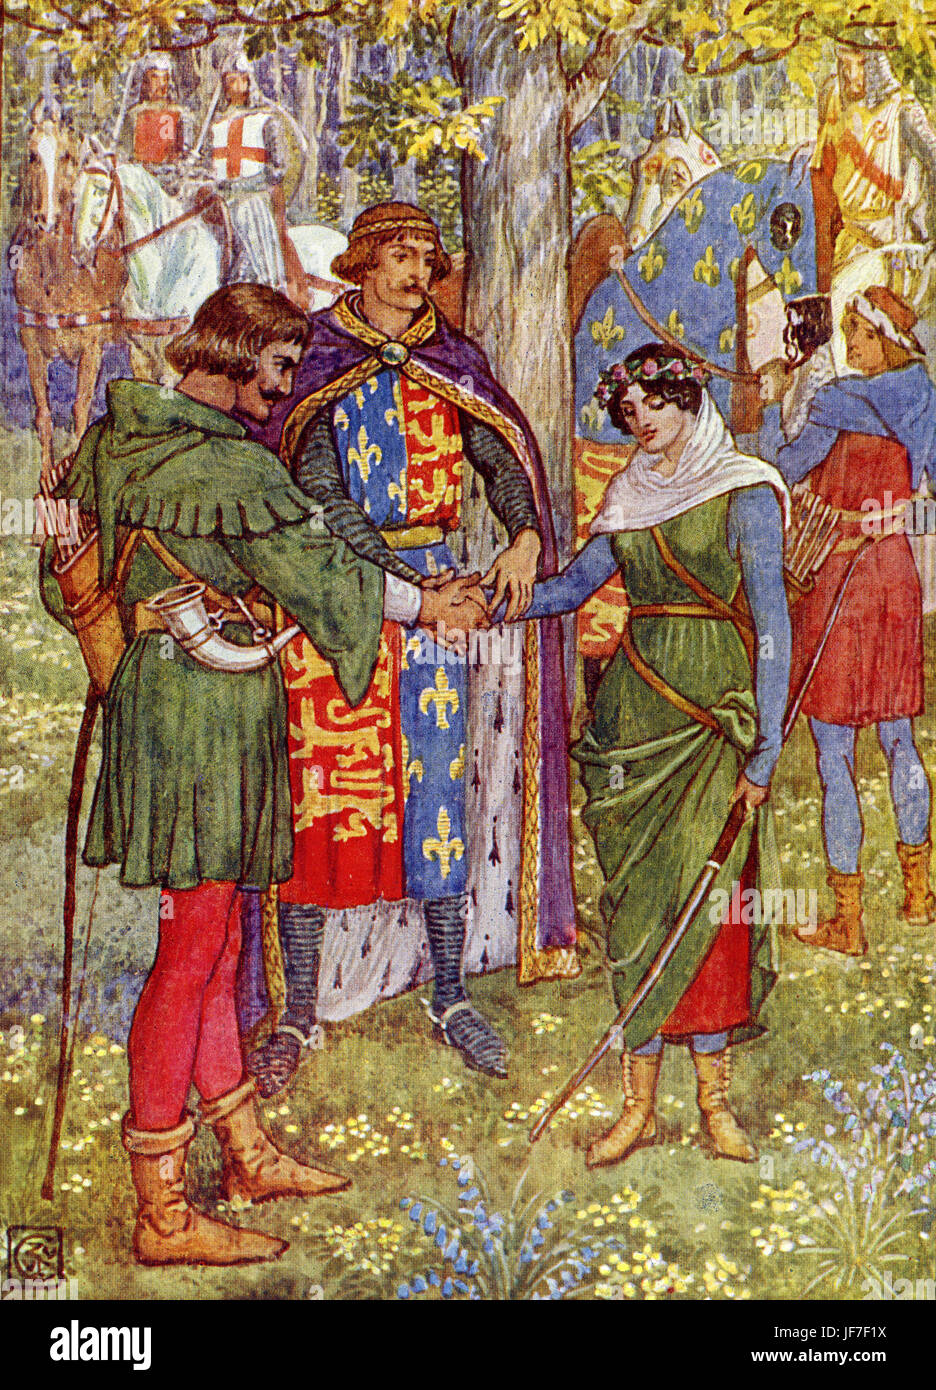 Robin Hood and the men of the Greenwood by Henry Gilbert. Caption reads: 'The King joins the hands of Robin Hood and Maid Marian'. Illustrated by Walter Crane. C.1912 Stock Photo